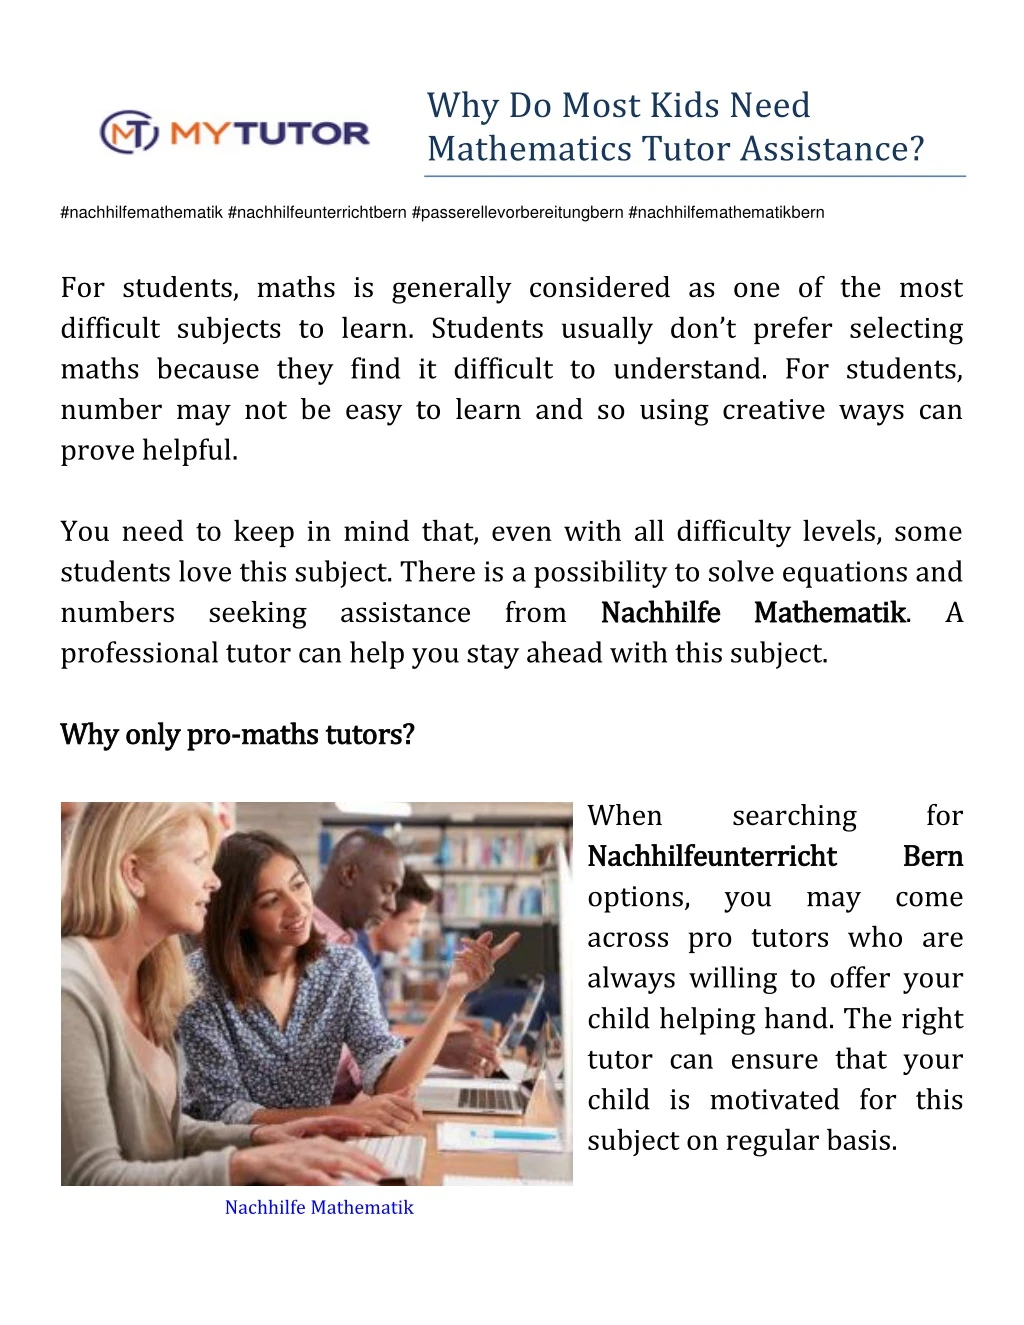 why do most kids need mathematics tutor assistance